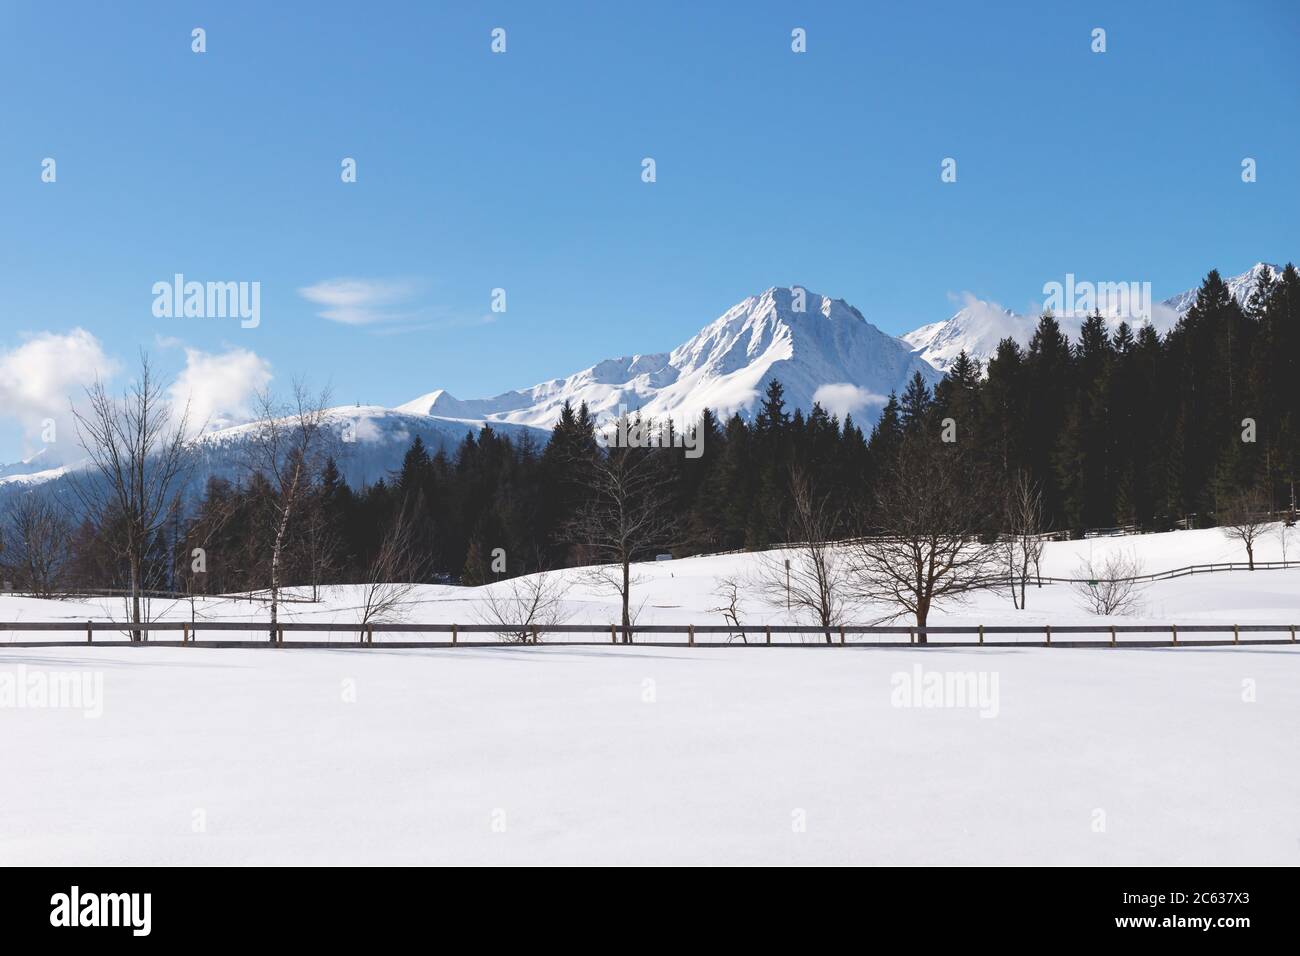 Sunlit snow mountain panorama with evergreen forest and leafless trees along fence in winter landscape, Seefeld, Tirol, Austria Stock Photo